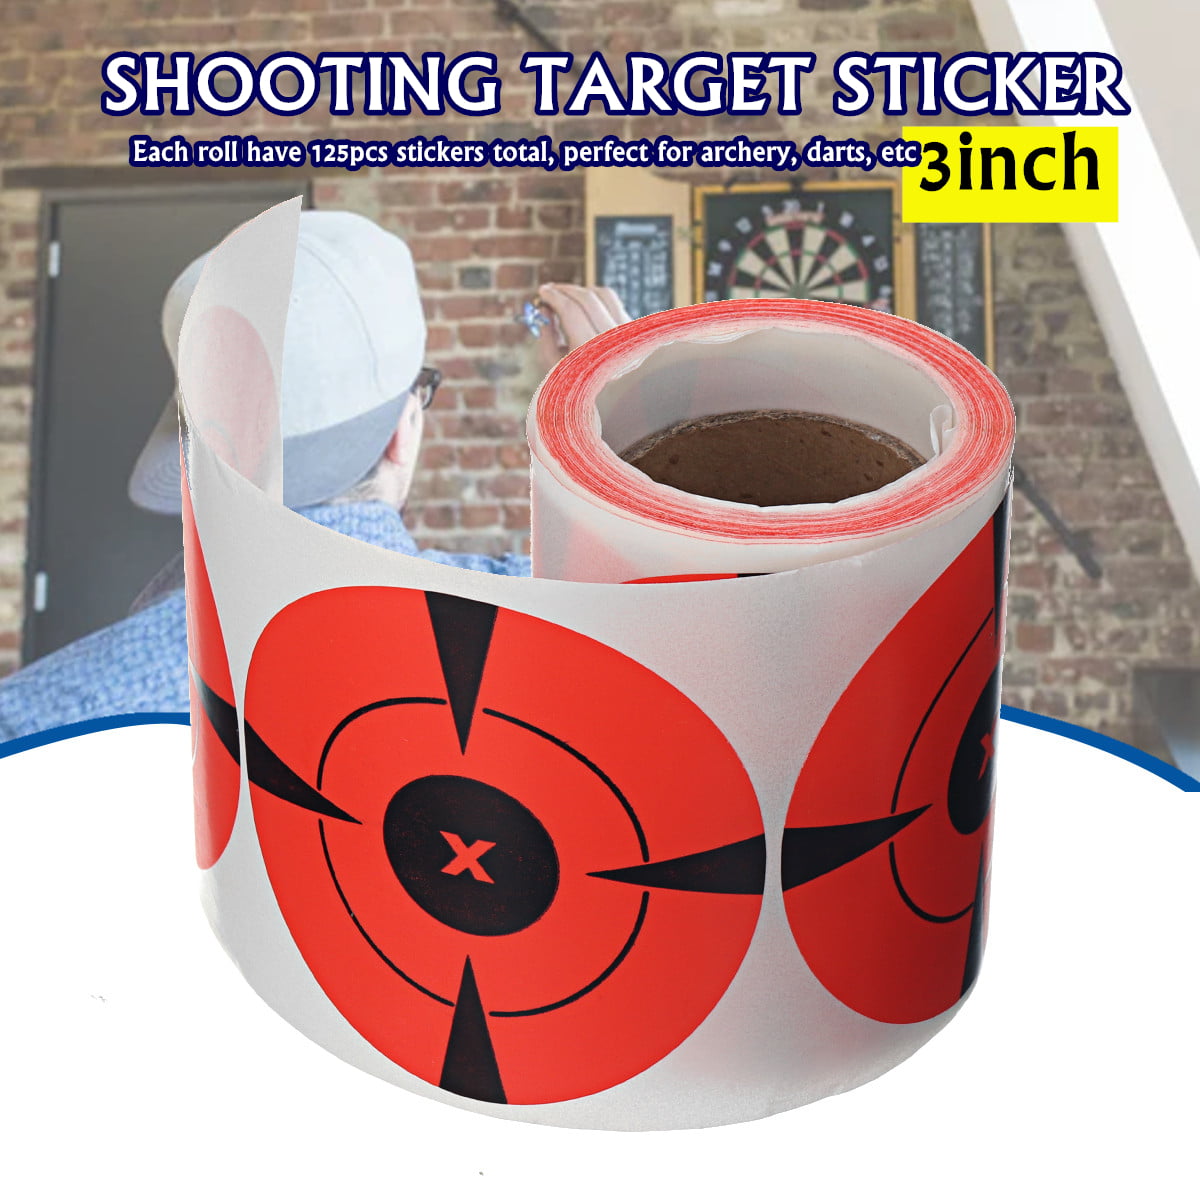 TM Free Shipping Target Pasters 3 Inch Round Adhesive Shooting Targets.. Hybsk 